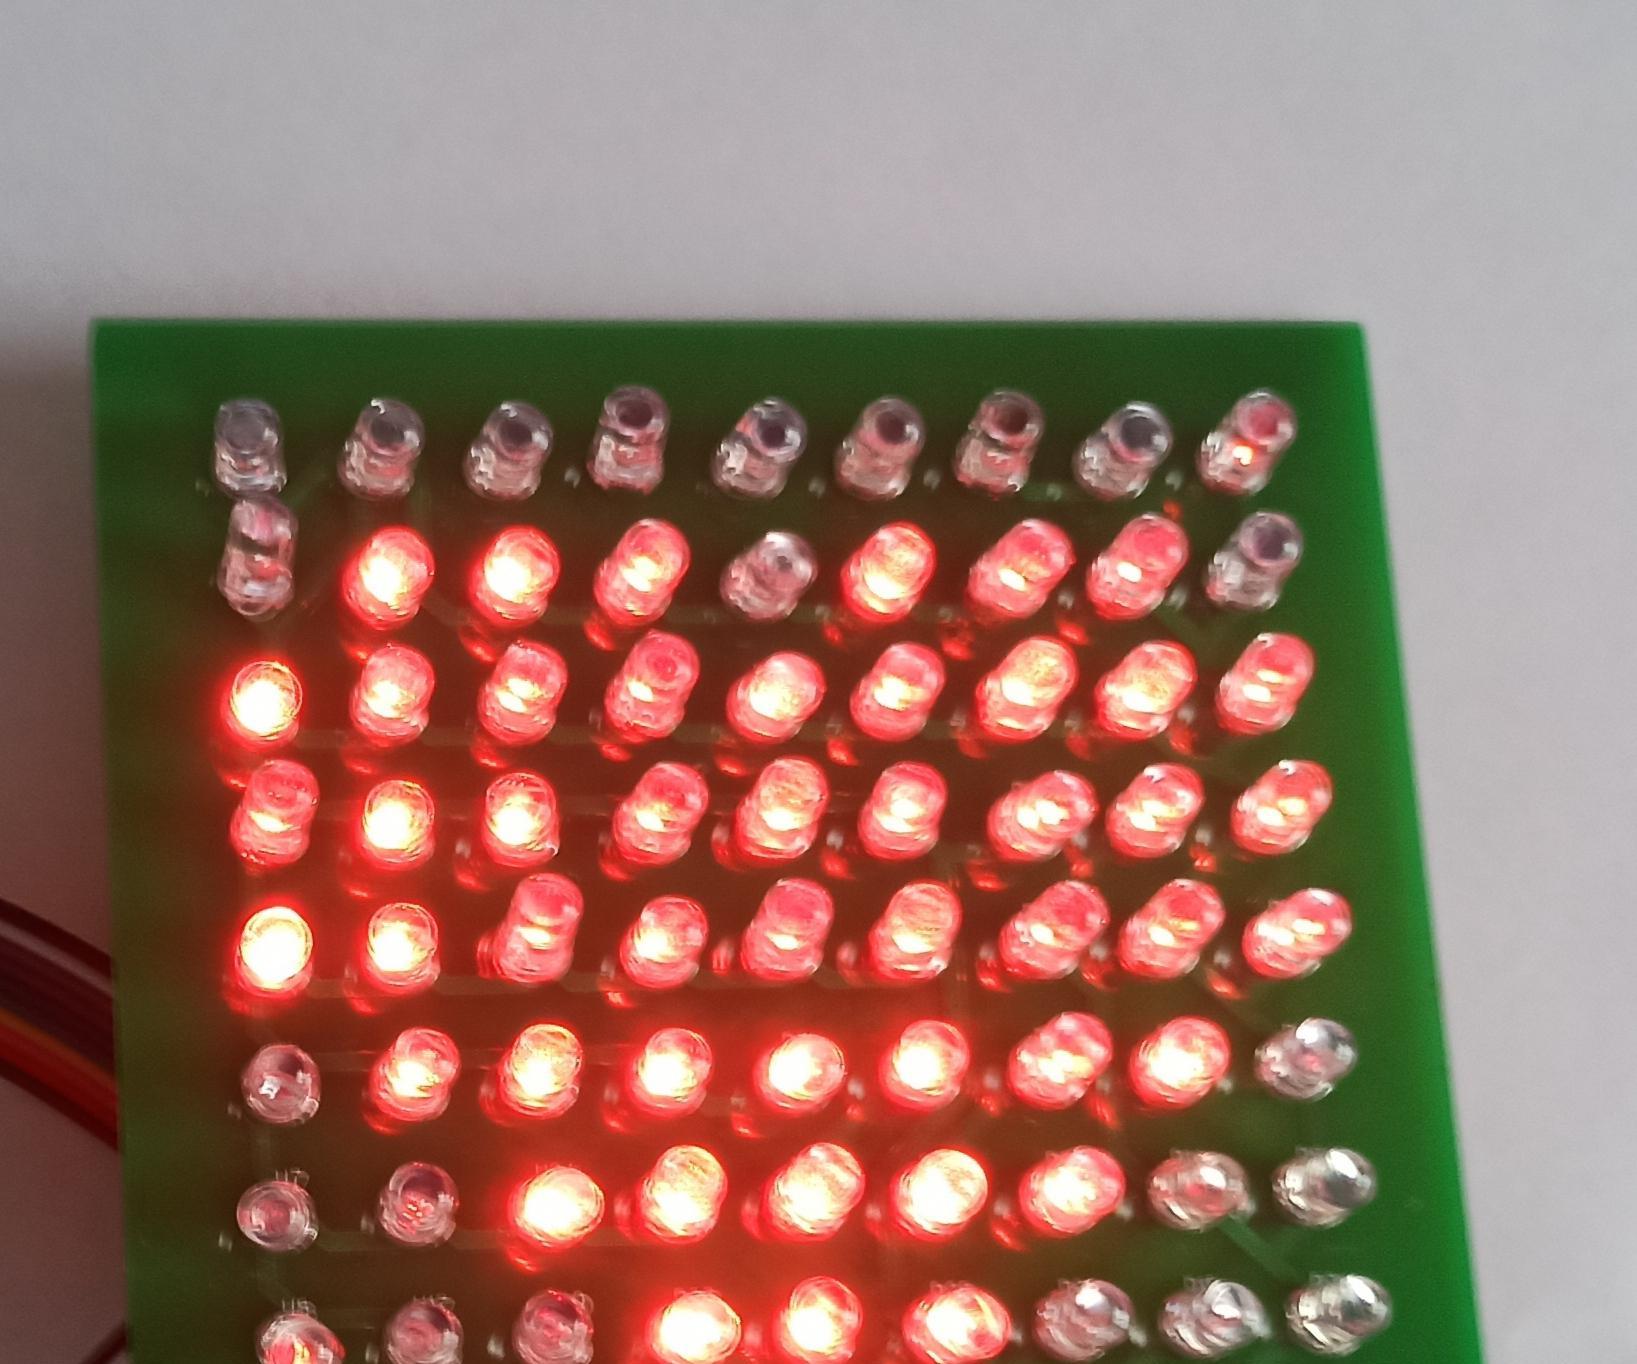 Charlieplexing 90 LEDs (10 Pins)